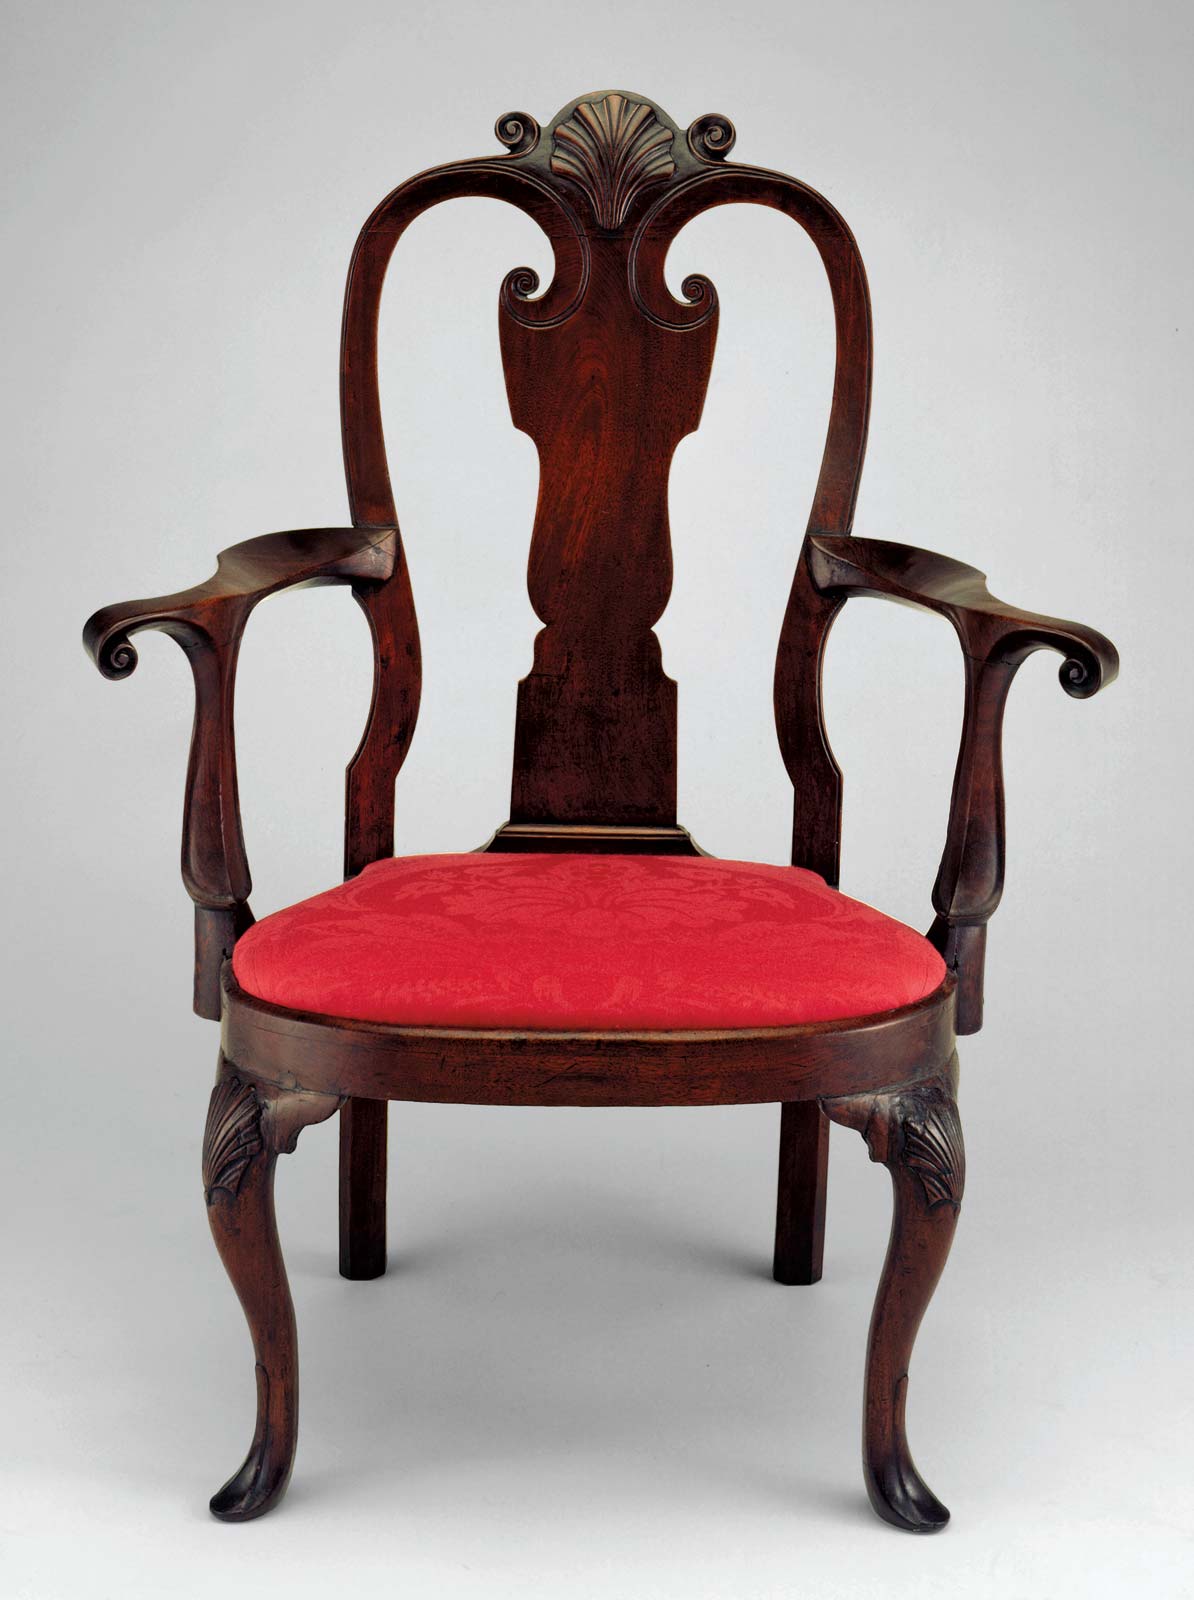 Chair designs through the ages reflect changes in materials, technology and society